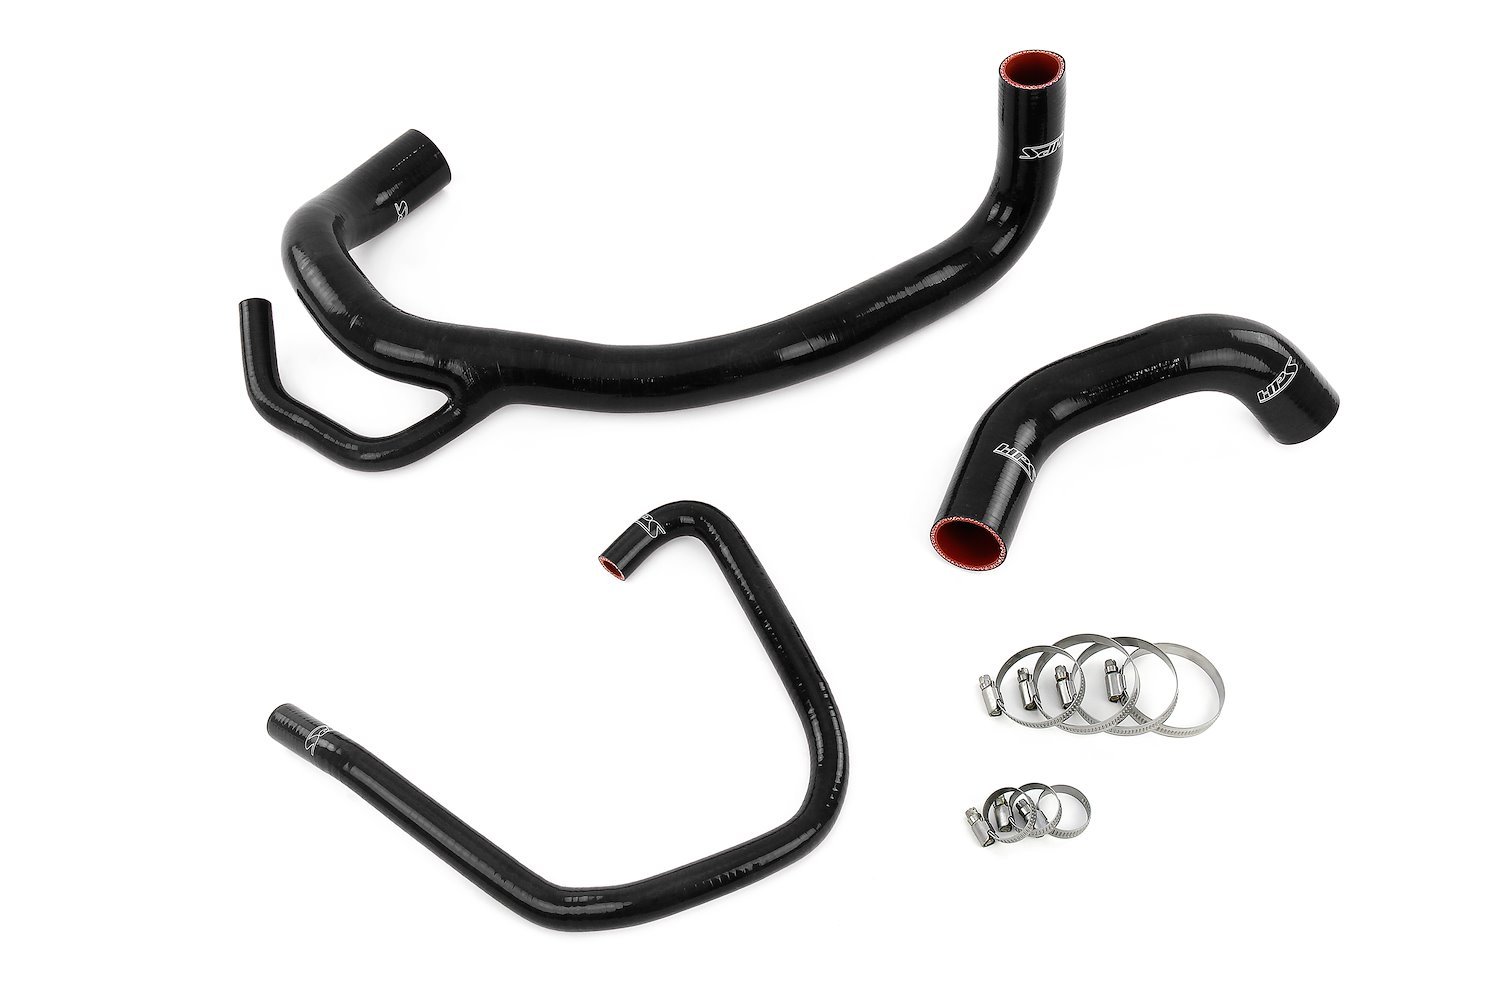 57-1616R-BLK Radiator Hose Kit, High-Temp 3-Ply Reinforced Silicone, Replaces OEM Rubber Radiator Hoses